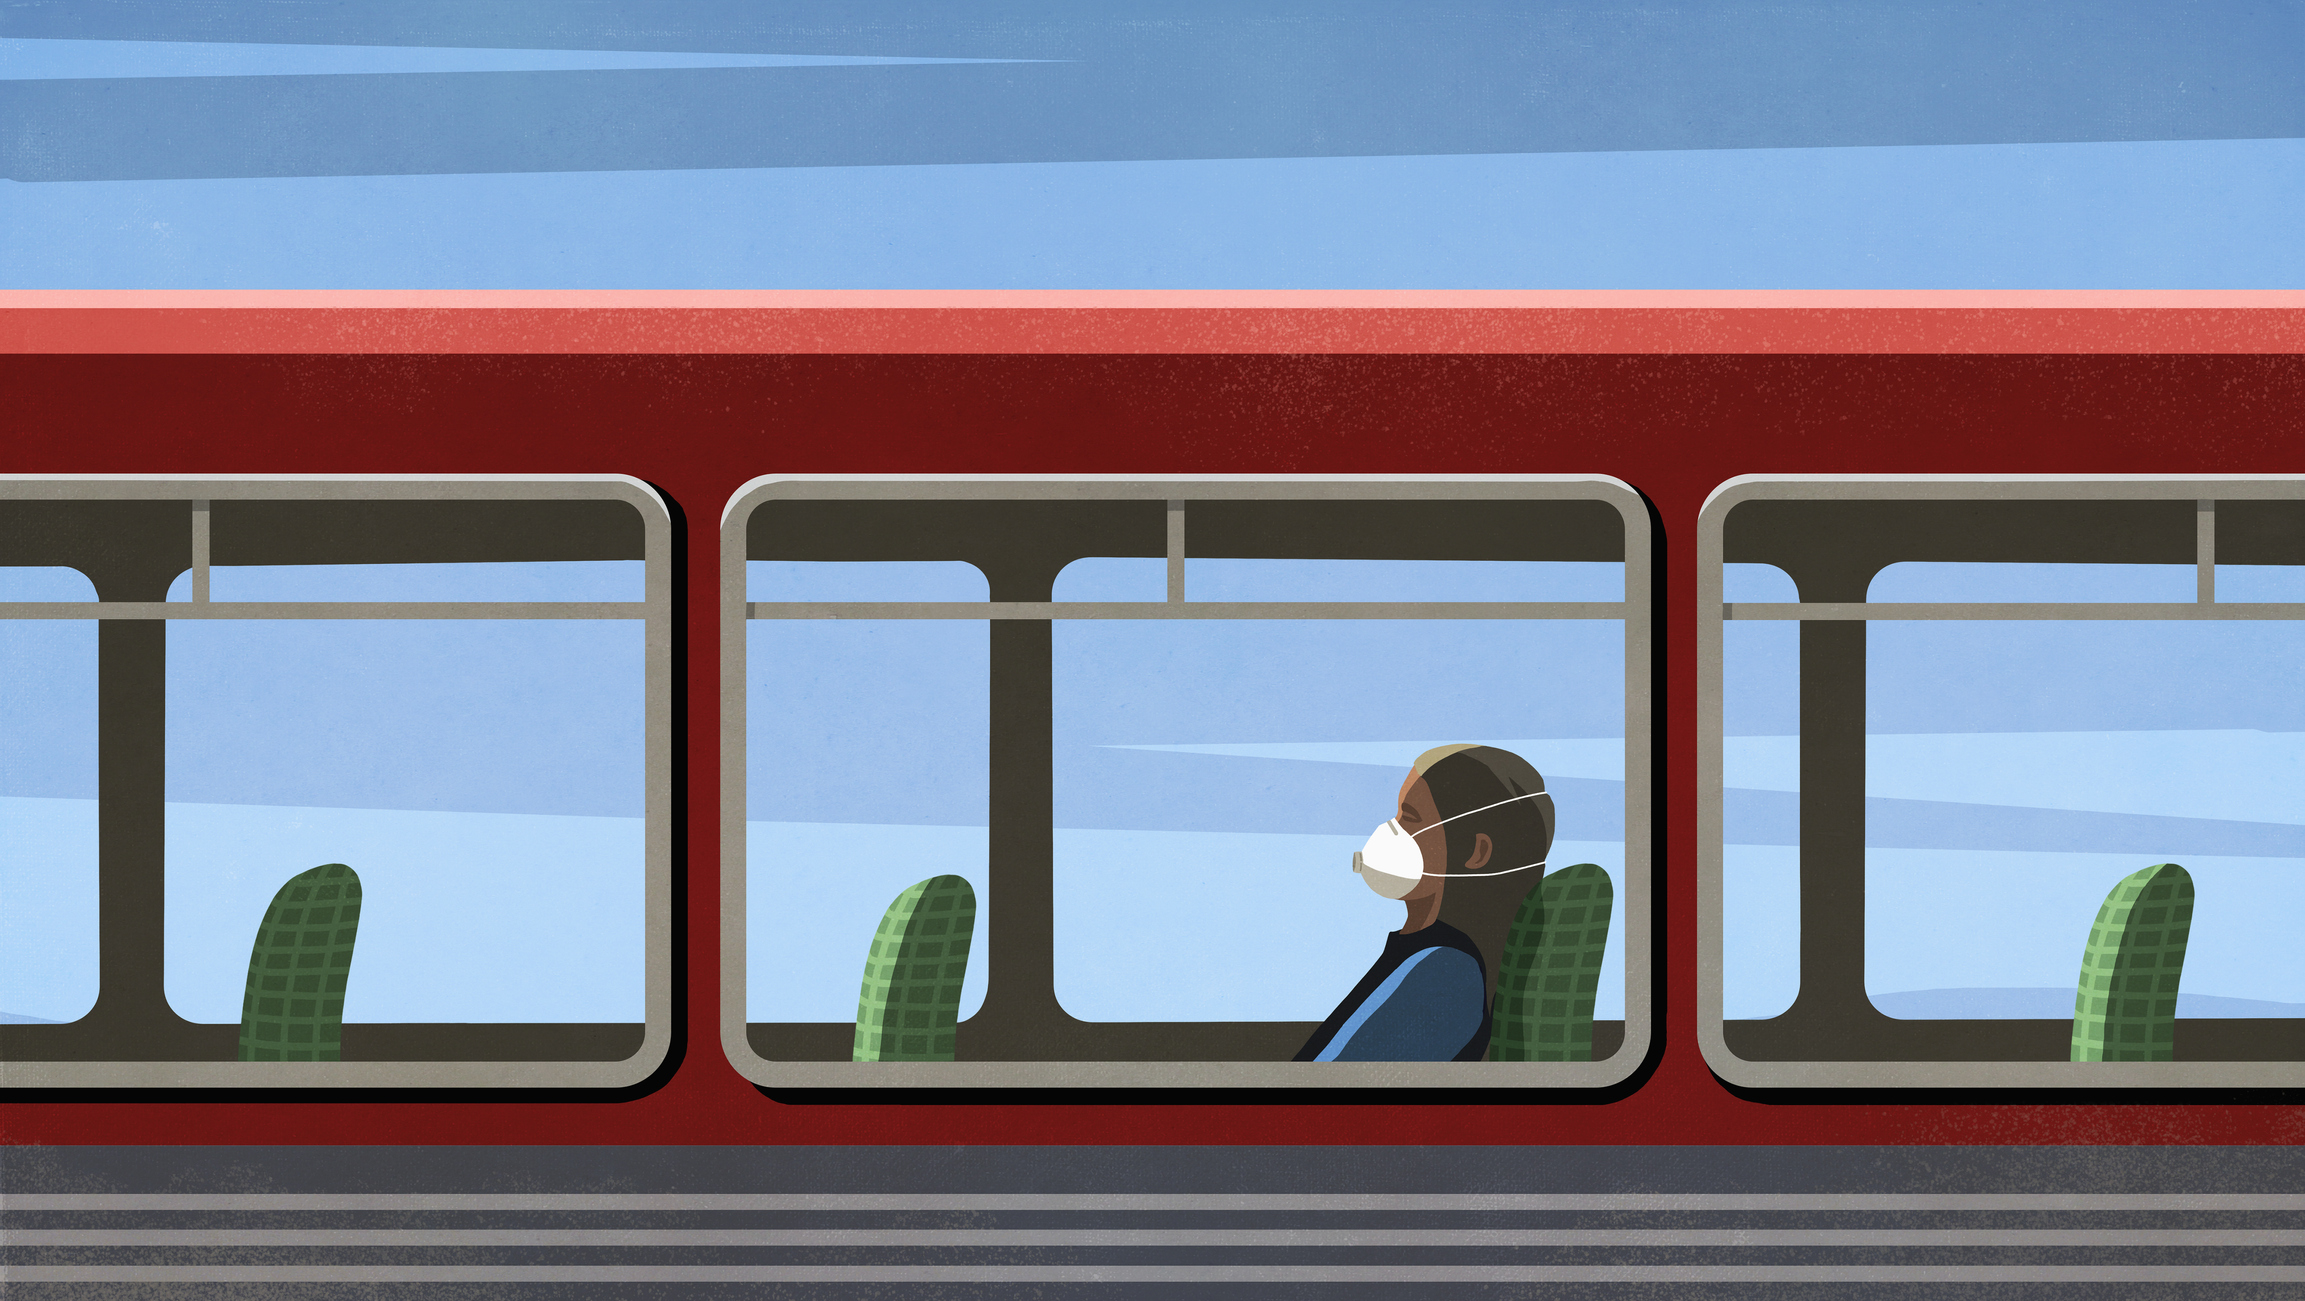 An illustration shows a woman riding on a bus, with empty seats behind and in front of her, wearing a mask.